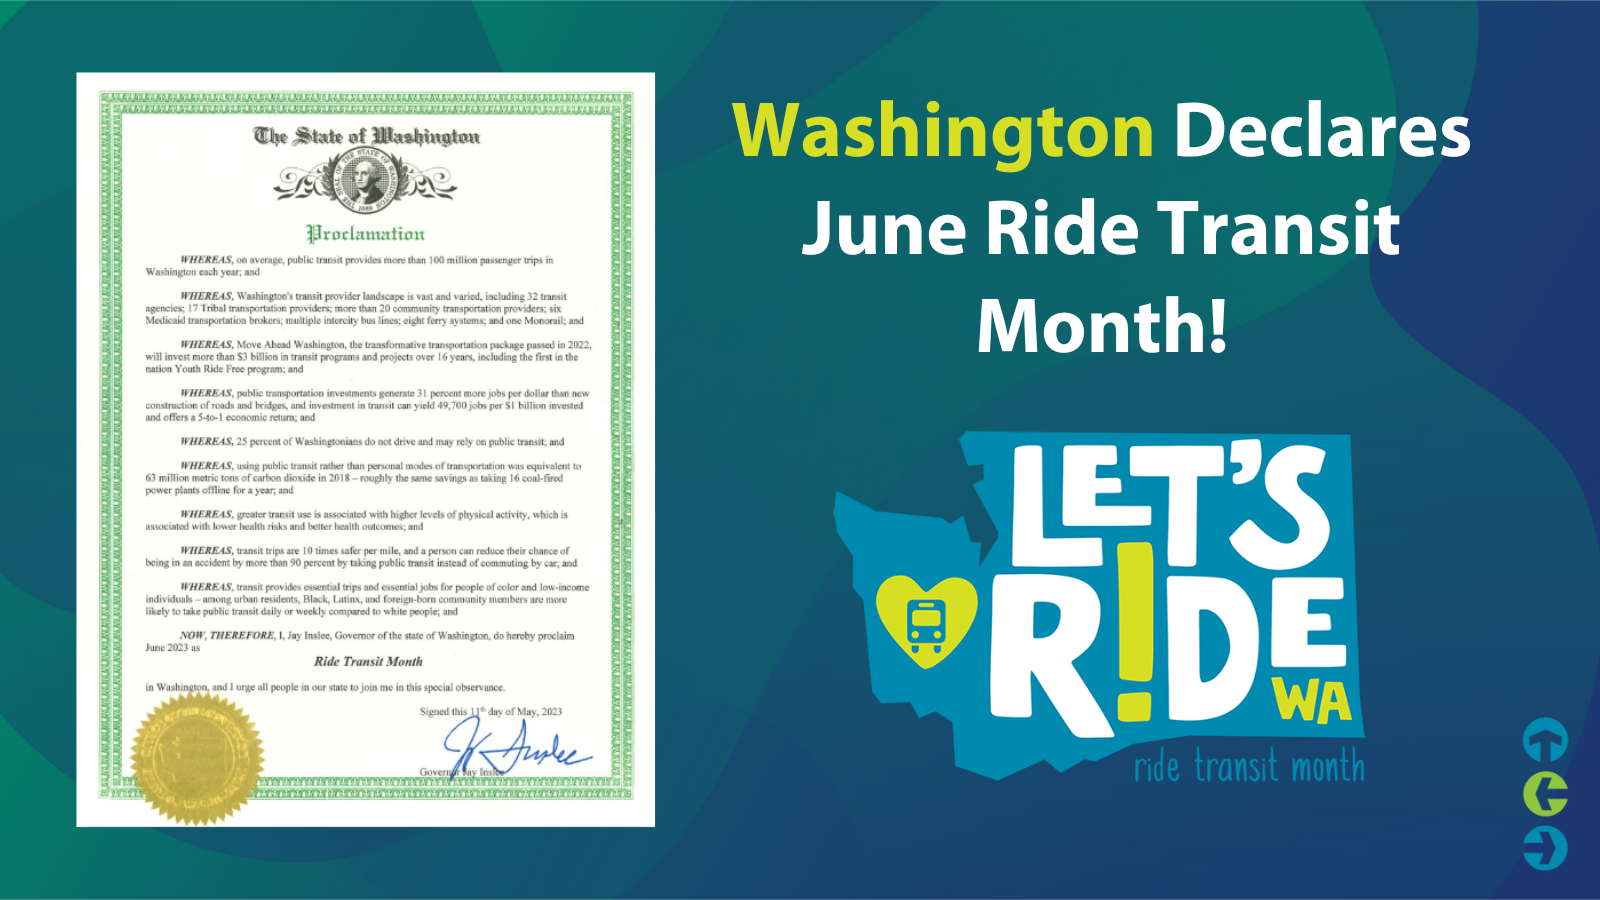 Image of Governor Inslee's "Ride Transit Month" proclamation next to the Ride Transit Month logo graphic